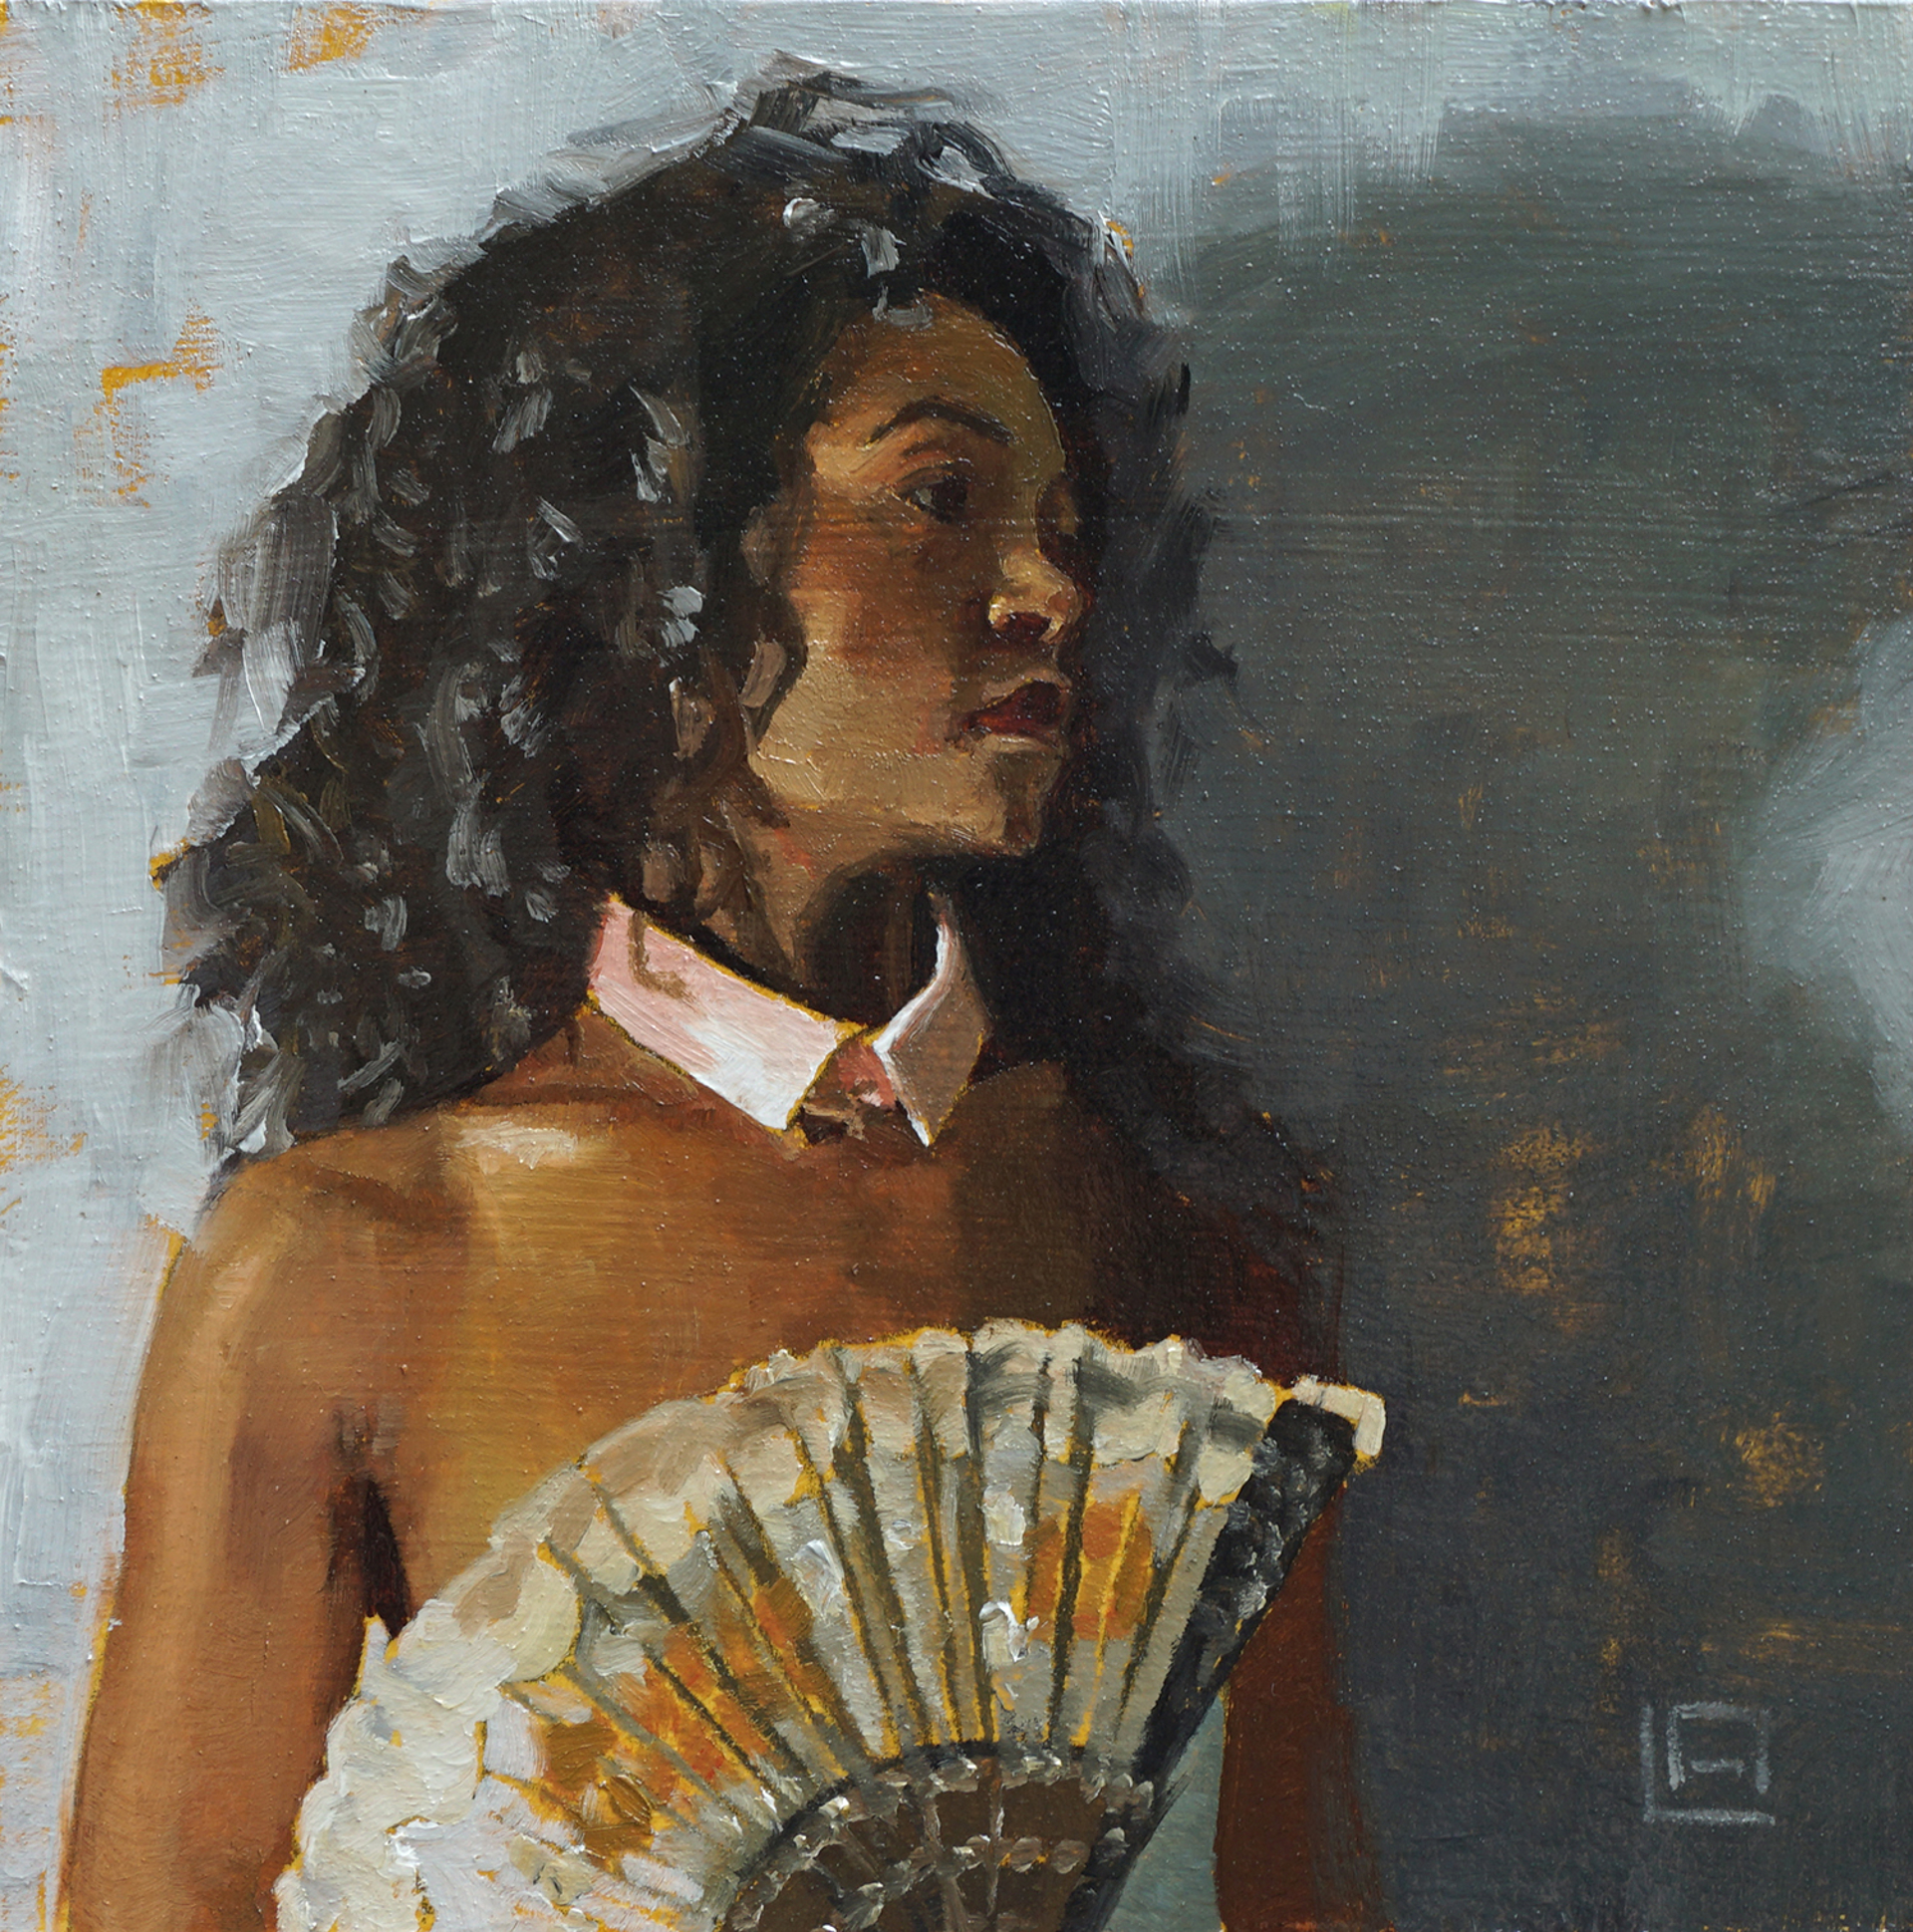 Lady with Fan by Linda Adair